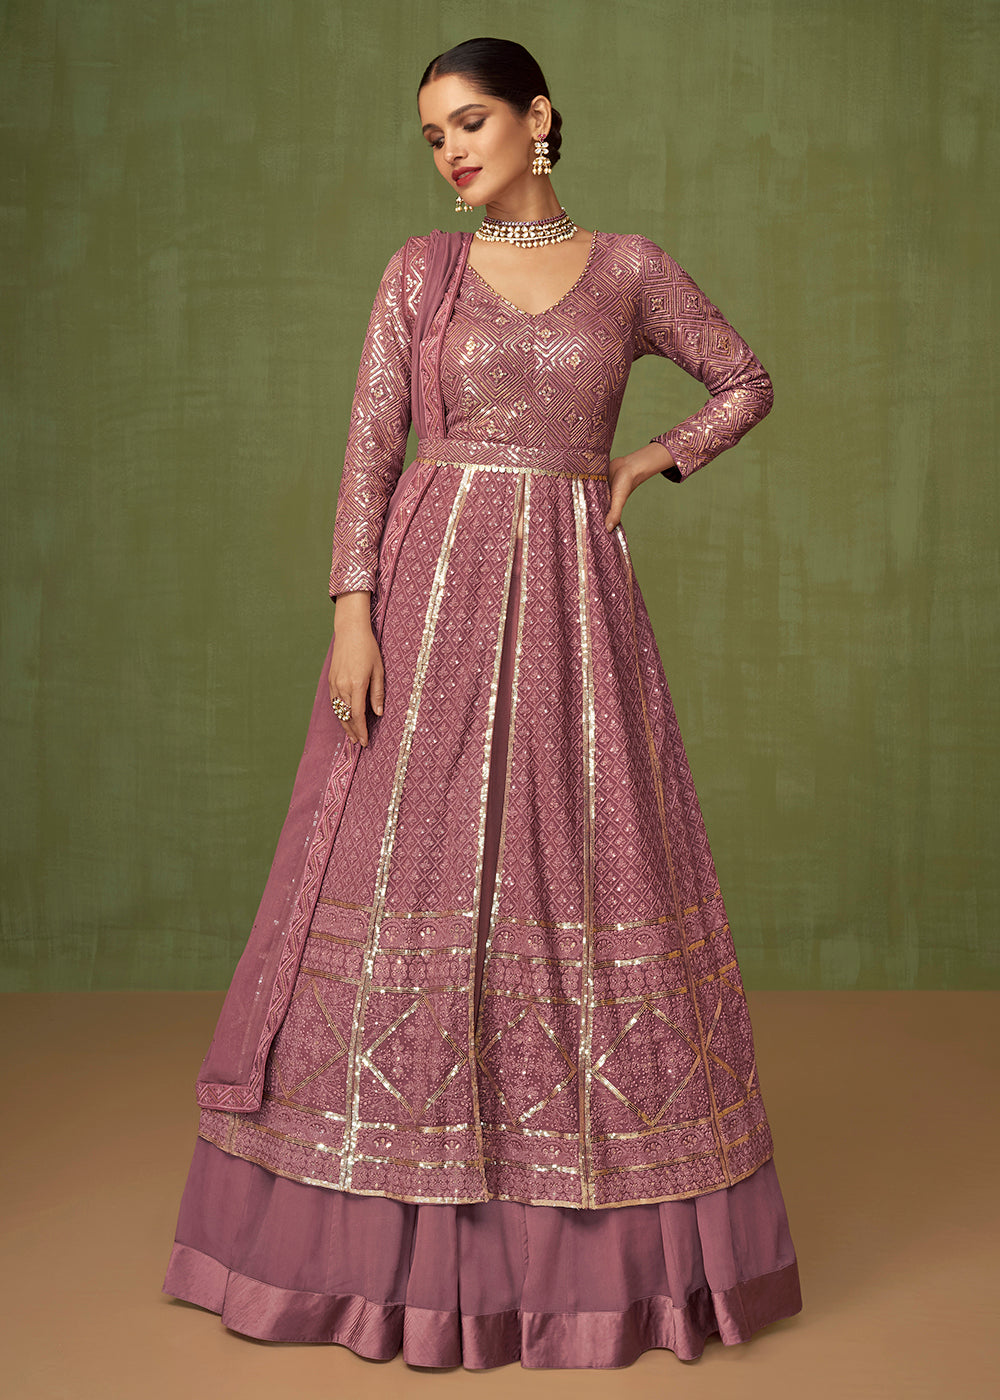 Buy Now Mauve Purple Georgette Wedding Party Skirt Anarkali Suit Online in USA, UK, Australia, New Zealand, Canada & Worldwide at Empress Clothing.